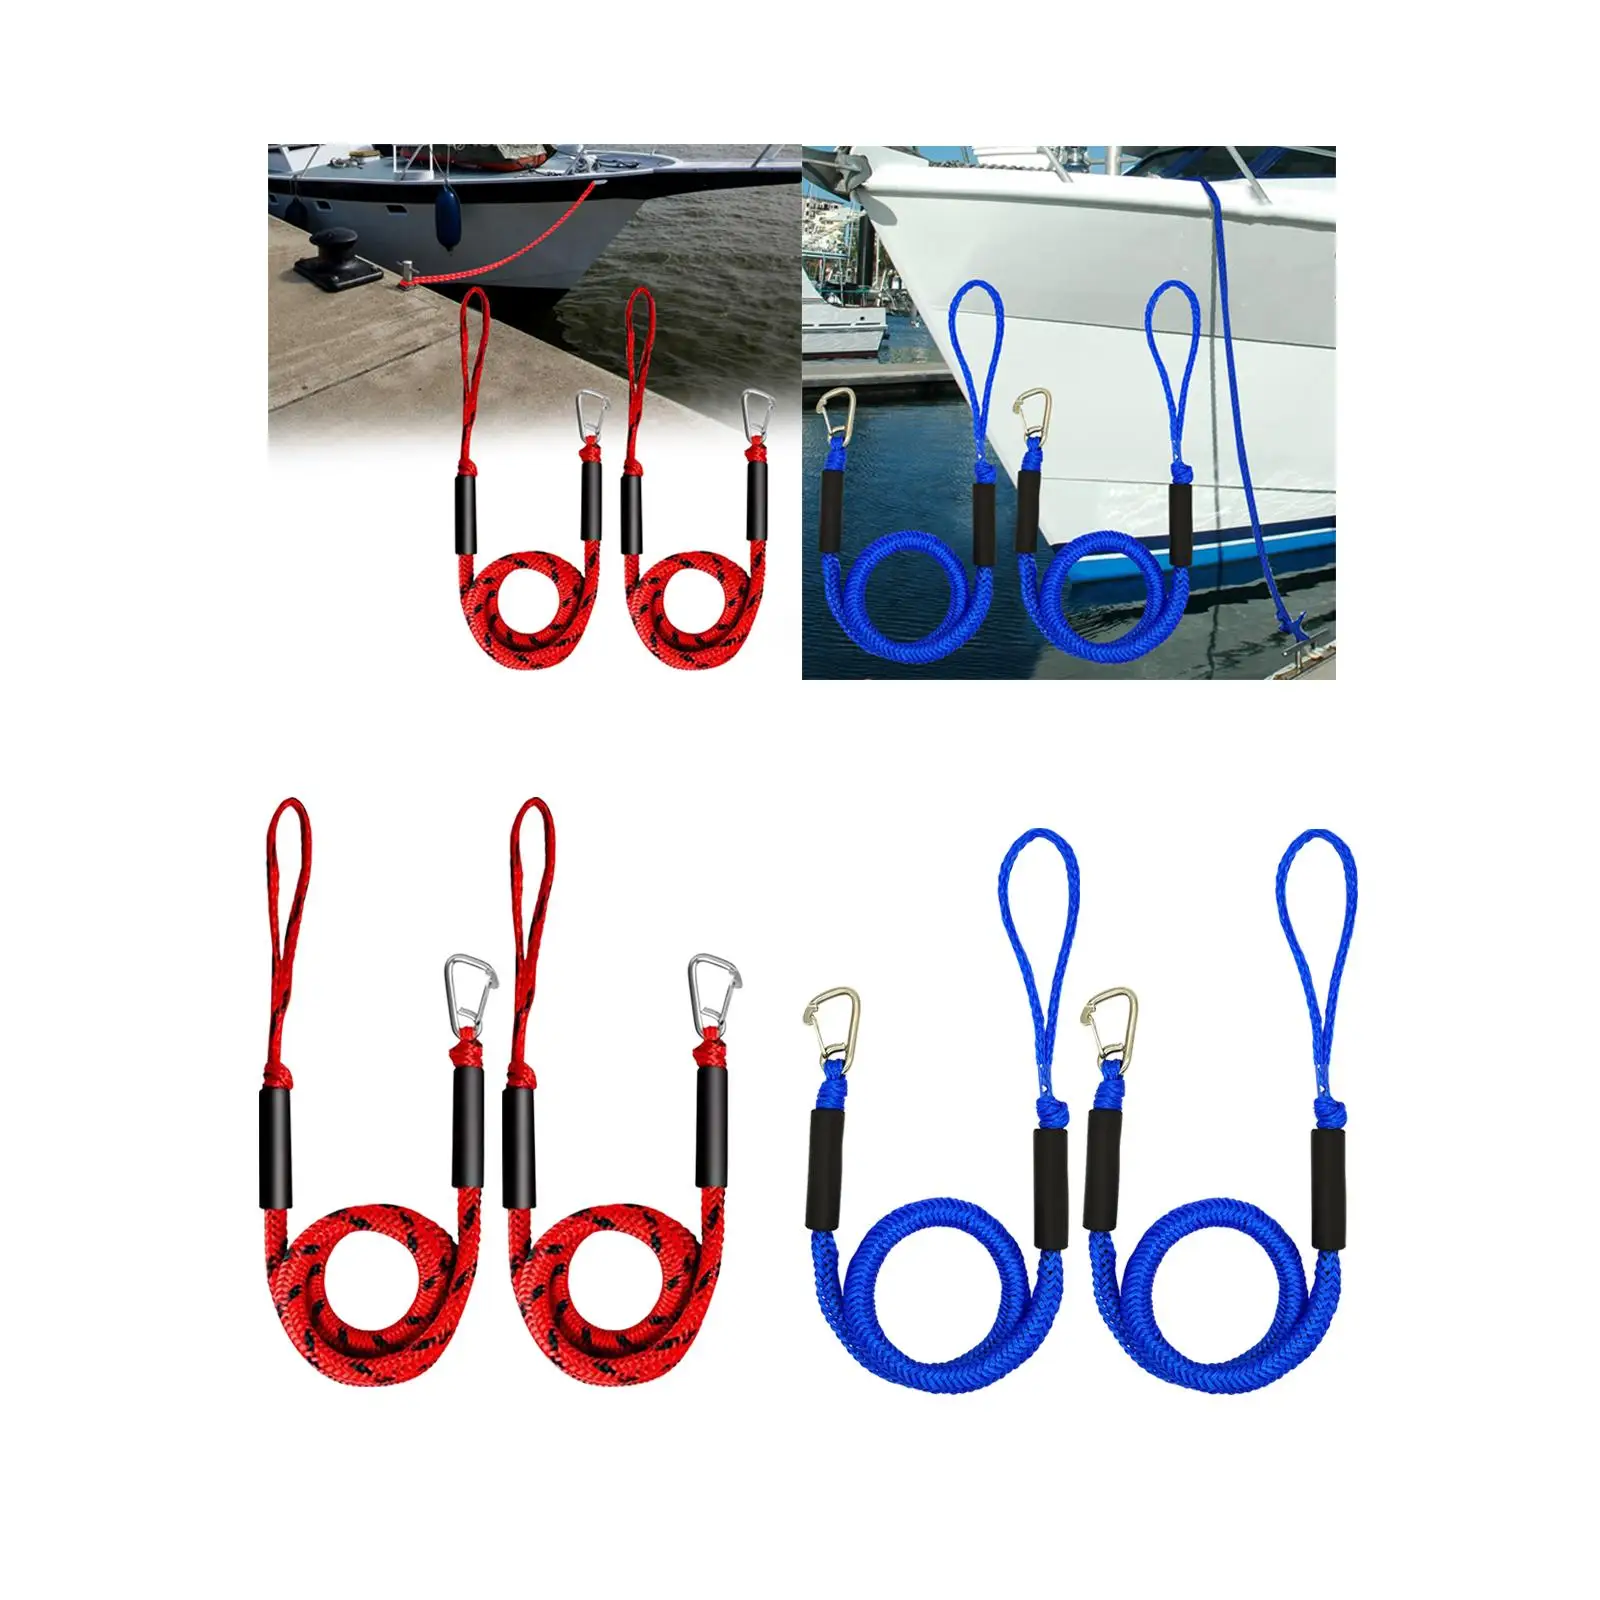 2x Boat Bungee Dock Line Boat Mooring Rope Sturdy with Stainless Steel Clip Marine for Canoe Power Boat Kayak Dinghy Watercraft